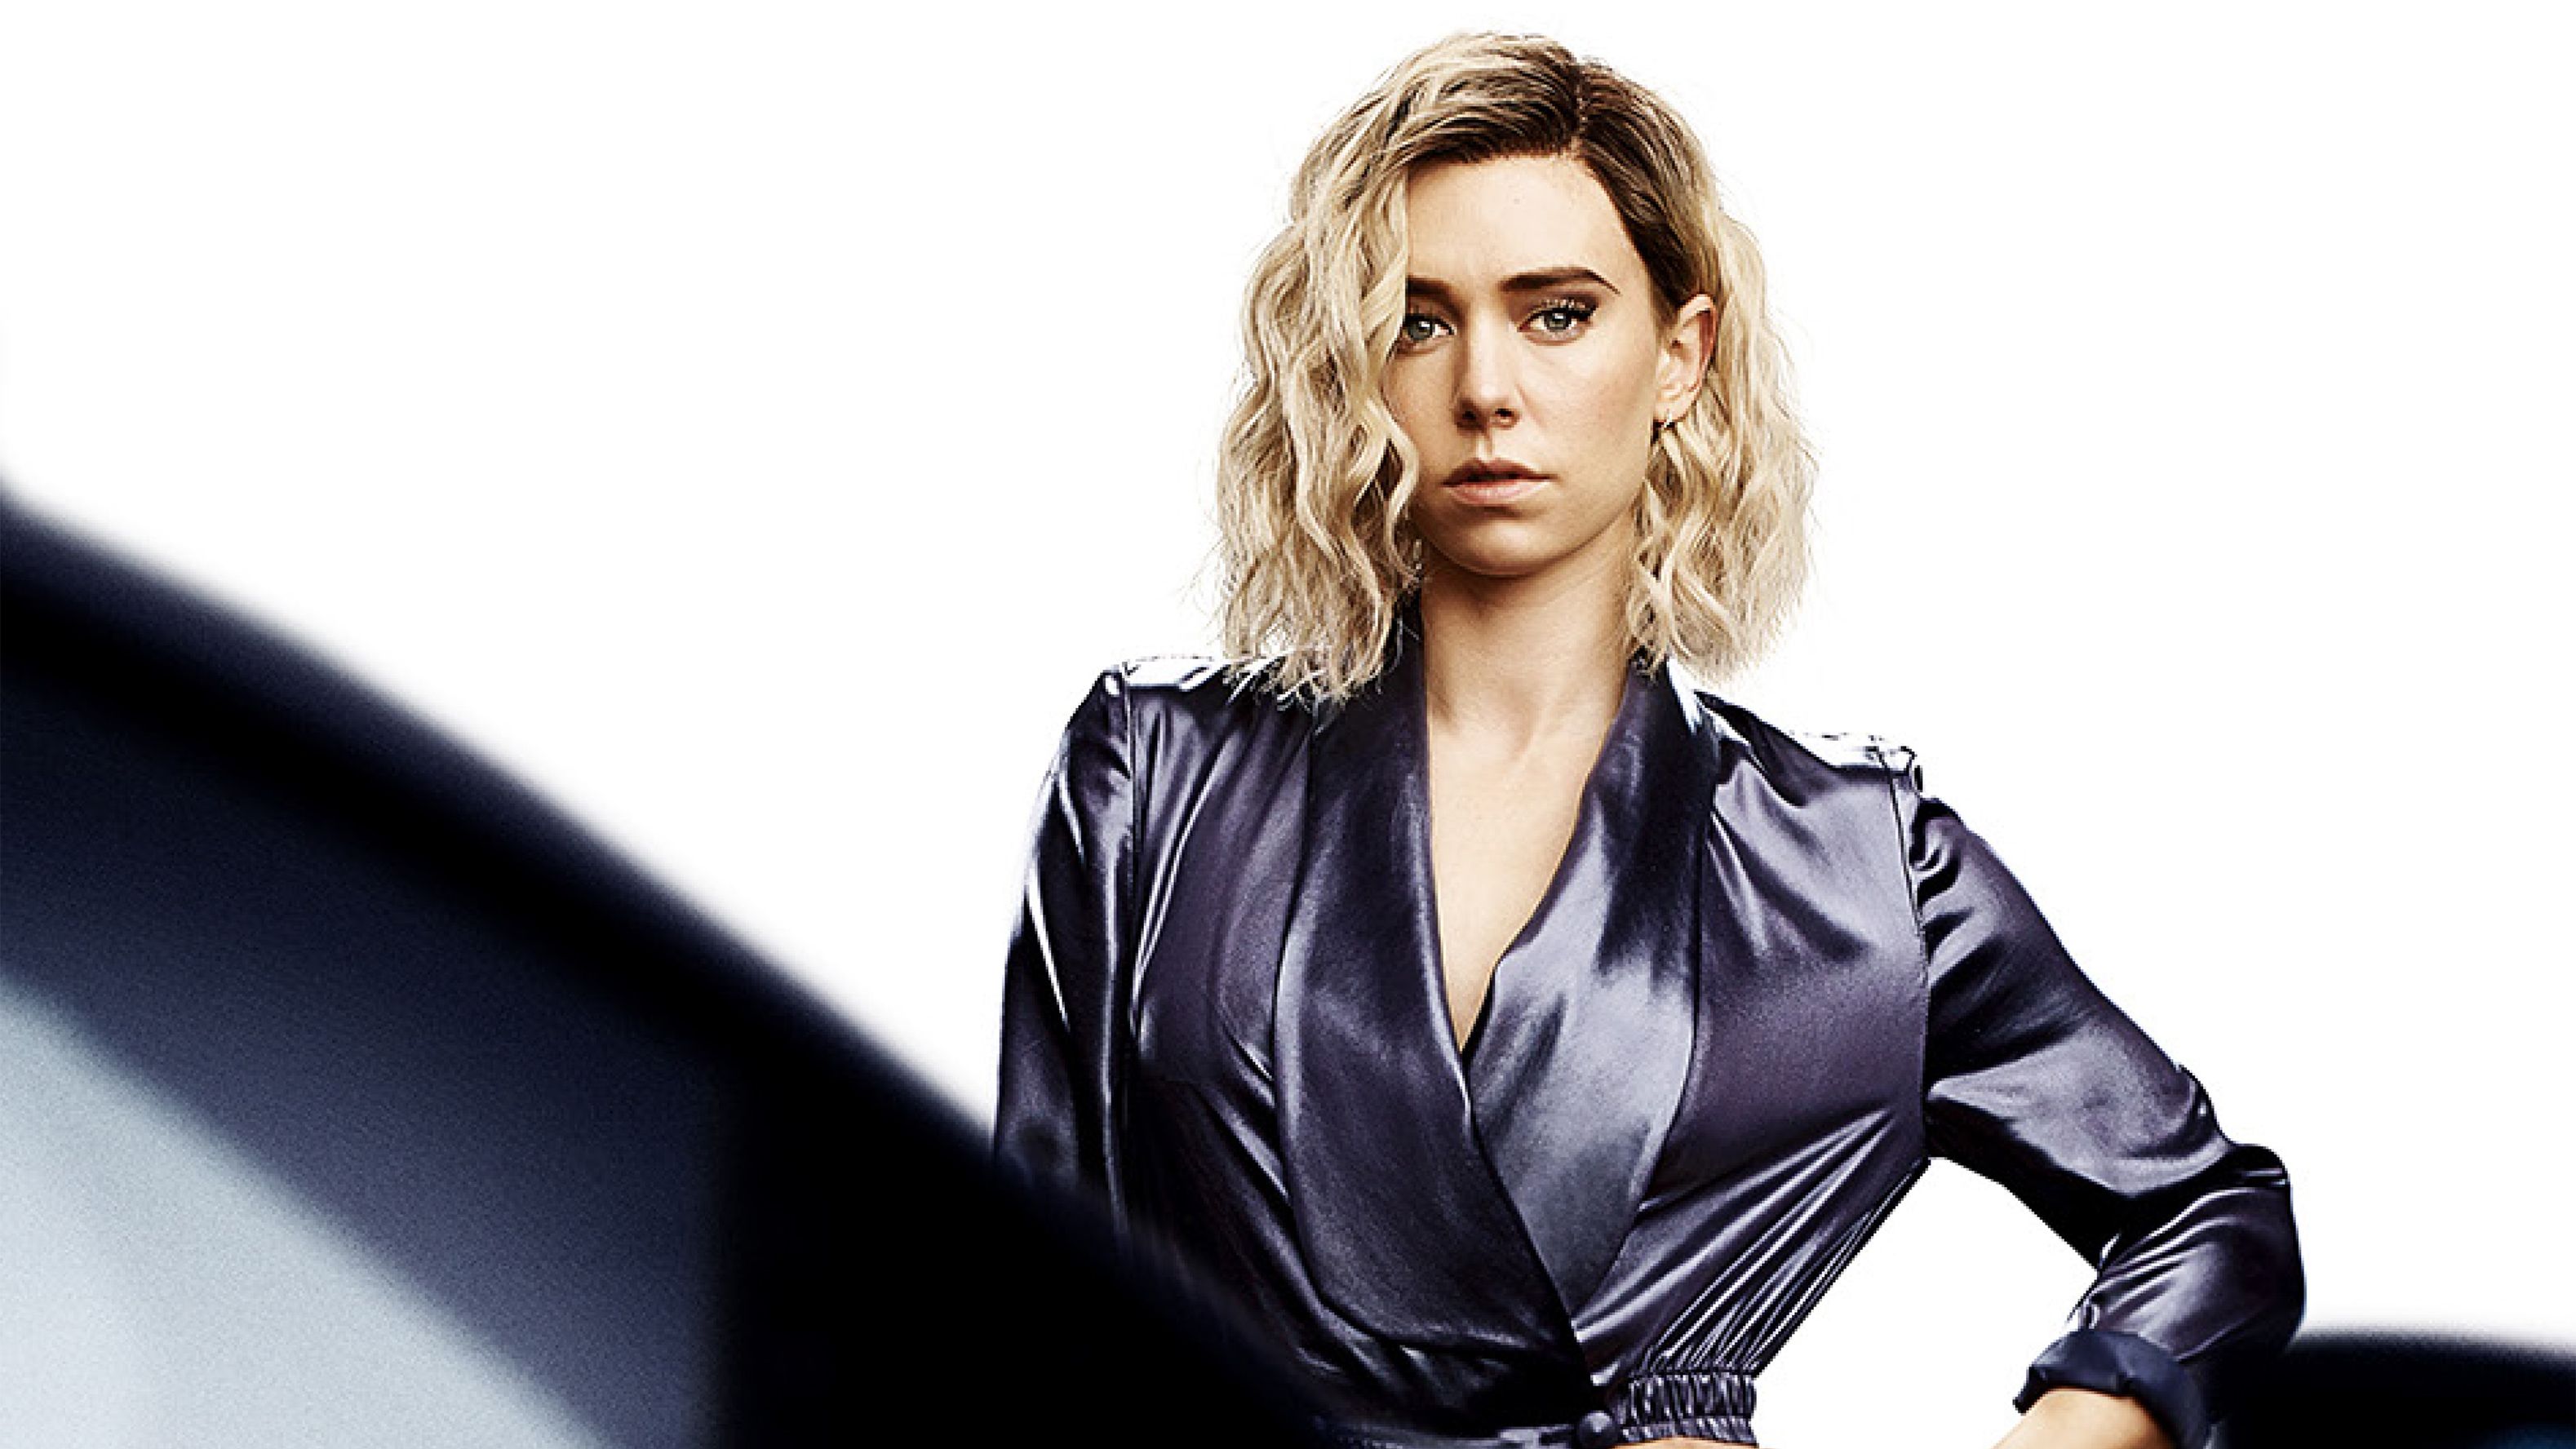 Hobbs & Shaw's Vanessa Kirby and Jason Statham's age difference